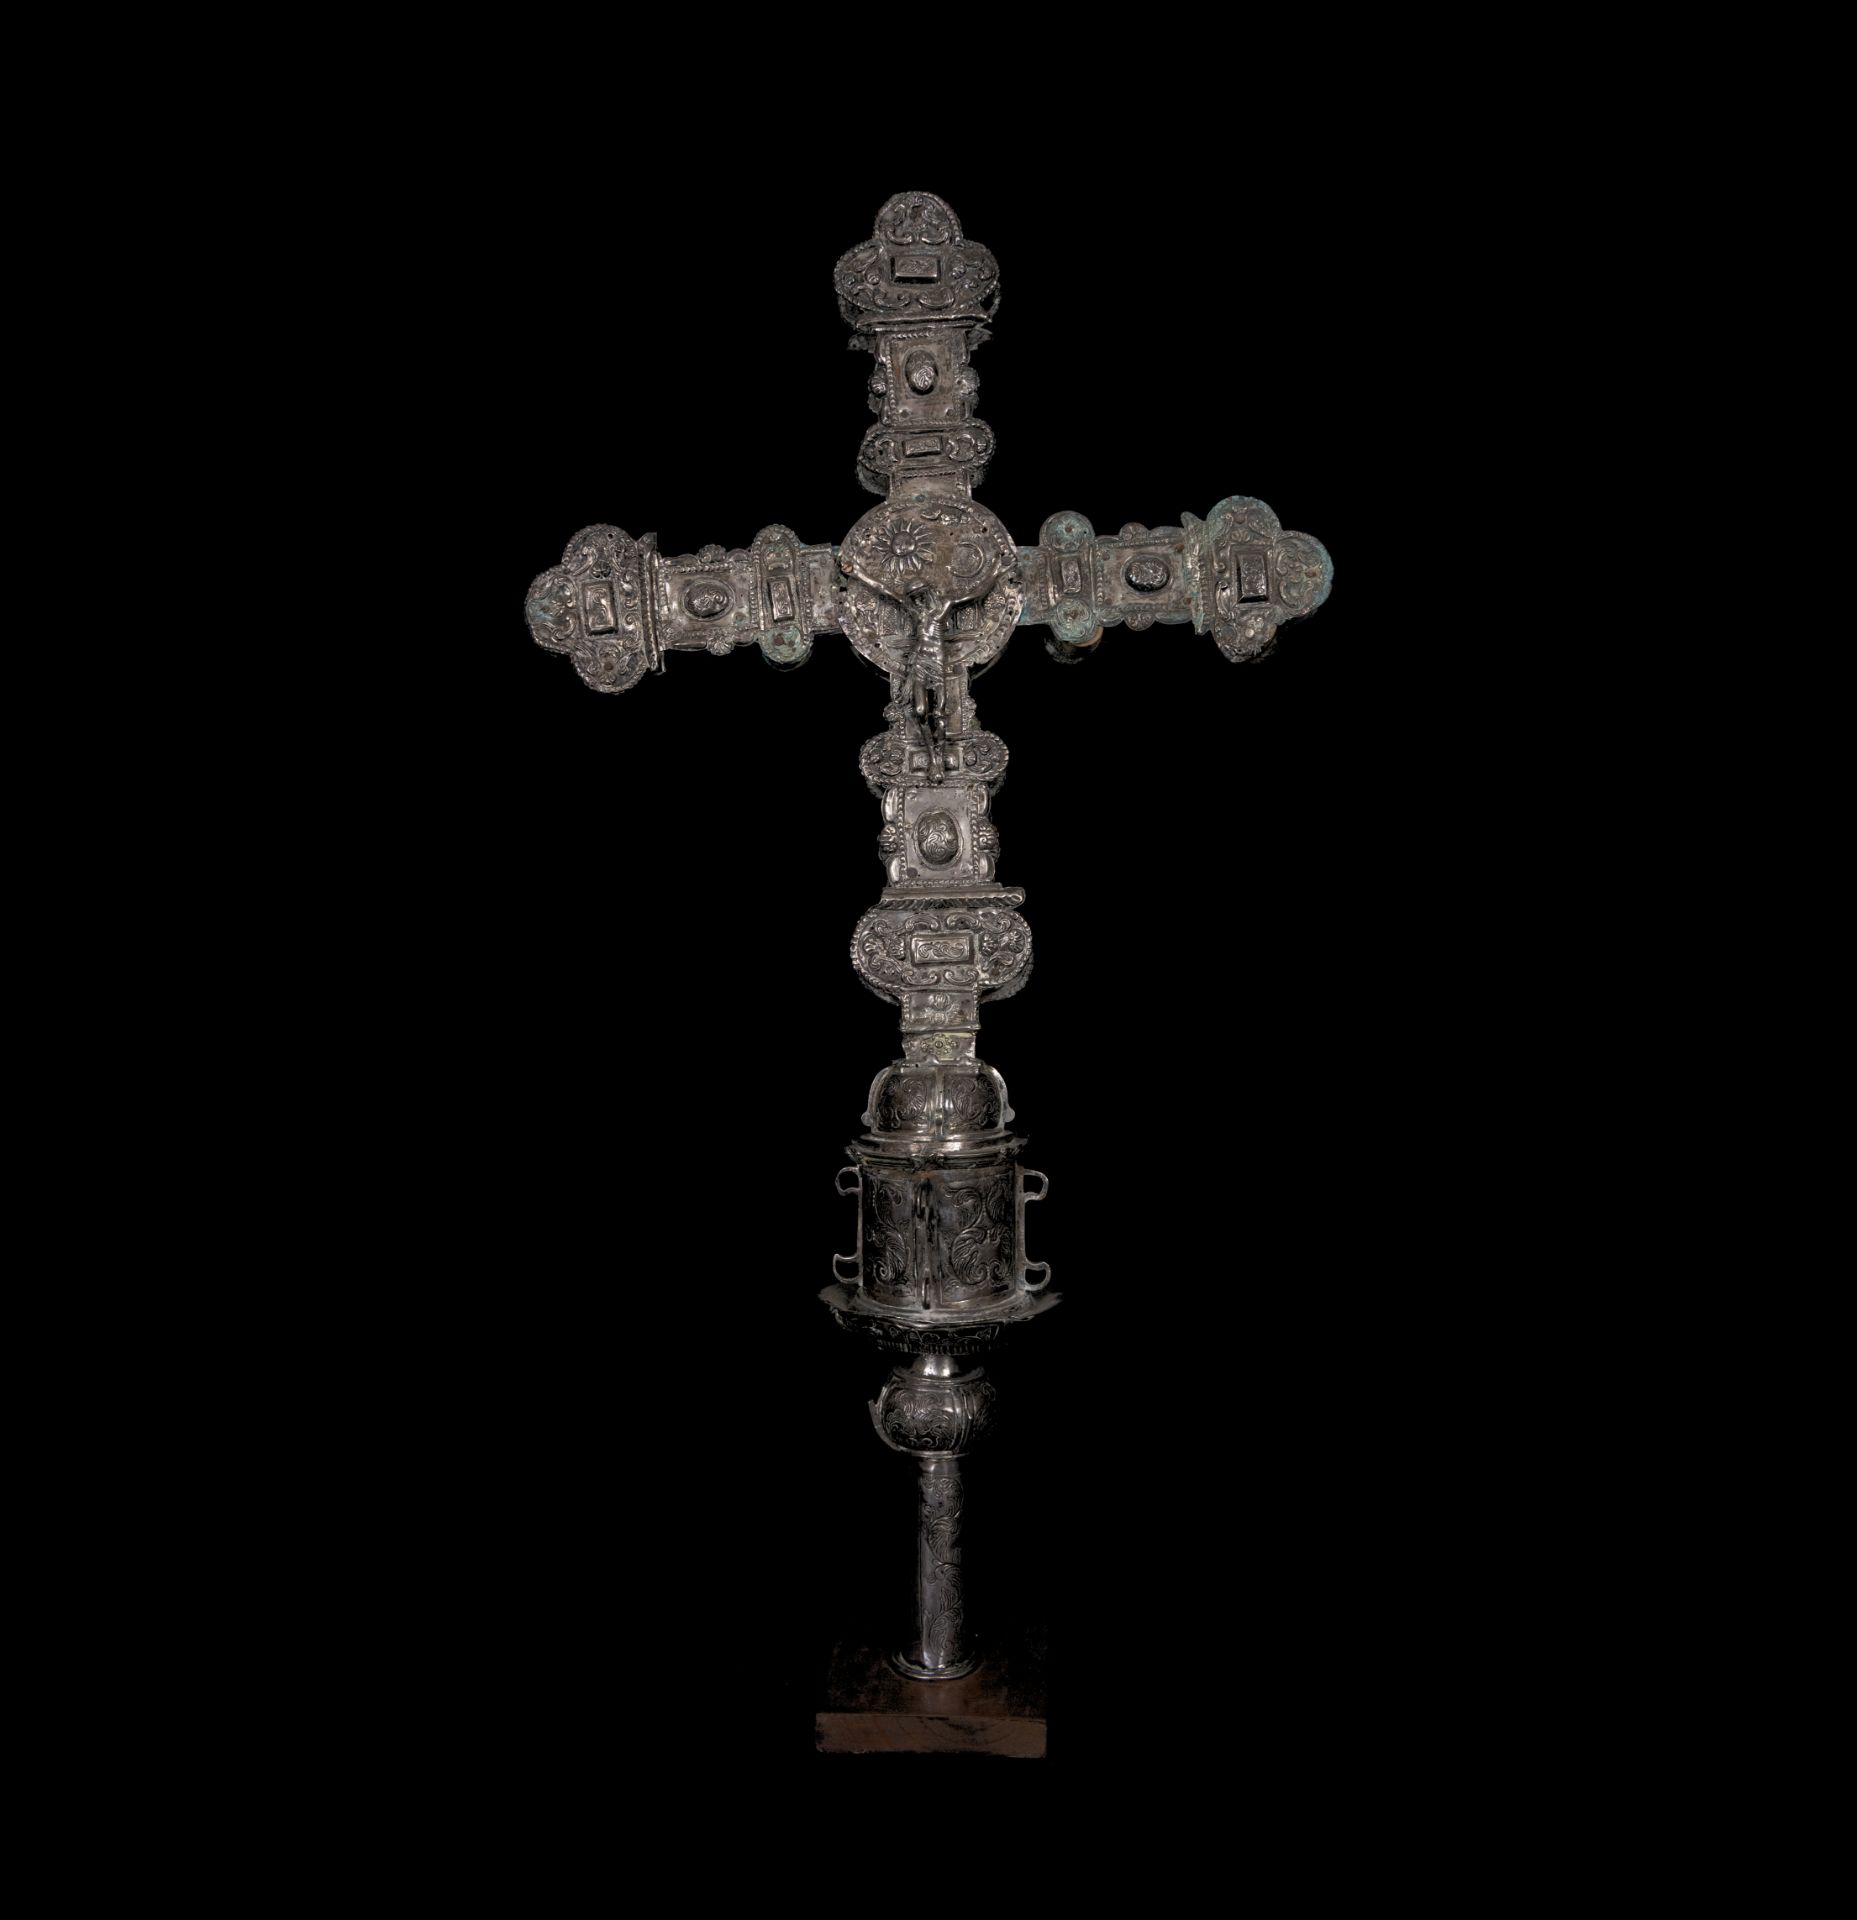 Large processional cross in colonial Peruvian silver from the 17th century, Viceroyalty of Peru, 17t